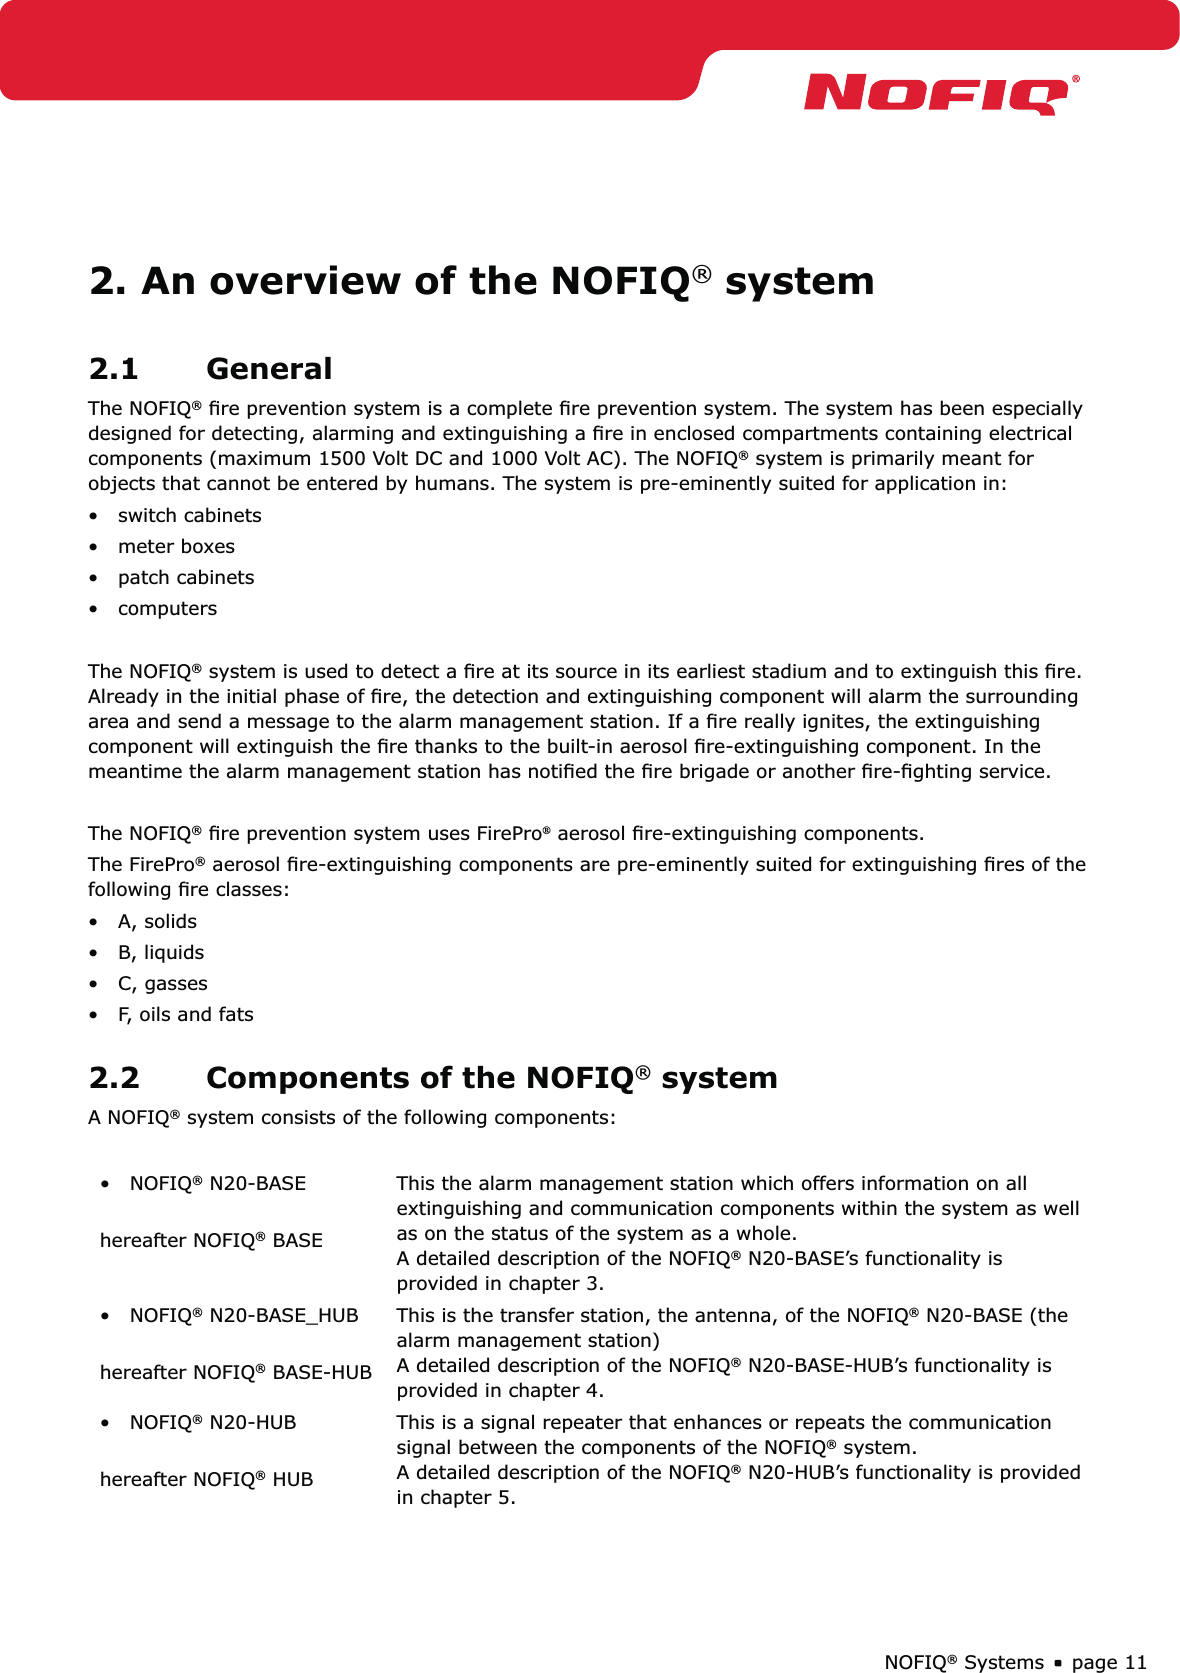 page 11NOFIQ® Systems2. An overview of the NOFIQ® system2.1 GeneralThe NOFIQ® ﬁre prevention system is a complete ﬁre prevention system. The system has been especially designed for detecting, alarming and extinguishing a ﬁre in enclosed compartments containing electrical components (maximum 1500 Volt DC and 1000 Volt AC). The NOFIQ® system is primarily meant for objects that cannot be entered by humans. The system is pre-eminently suited for application in:•   switch cabinets•   meter boxes•   patch cabinets•   computersThe NOFIQ® system is used to detect a ﬁre at its source in its earliest stadium and to extinguish this ﬁre. Already in the initial phase of ﬁre, the detection and extinguishing component will alarm the surrounding area and send a message to the alarm management station. If a ﬁre really ignites, the extinguishing component will extinguish the ﬁre thanks to the built-in aerosol ﬁre-extinguishing component. In the meantime the alarm management station has notiﬁed the ﬁre brigade or another ﬁre-ﬁghting service.The NOFIQ® ﬁre prevention system uses FirePro aerosol ﬁre-extinguishing components. The FirePro® aerosol ﬁre-extinguishing components are pre-eminently suited for extinguishing ﬁres of the following ﬁre classes:•   A, solids•   B, liquids•   C, gasses•   F, oils and fats2.2  Components of the NOFIQ® systemA NOFIQ® system consists of the following components:•   NOFIQ® N20-BASE hereafter NOFIQ® BASEThis the alarm management station which offers information on all extinguishing and communication components within the system as well as on the status of the system as a whole. A detailed description of the NOFIQ® N20-BASE’s functionality is provided in chapter 3.•   NOFIQ® N20-BASE_HUB hereafter NOFIQ® BASE-HUBThis is the transfer station, the antenna, of the NOFIQ® N20-BASE (the alarm management station) A detailed description of the NOFIQ® N20-BASE-HUB’s functionality is provided in chapter 4.•   NOFIQ® N20-HUB hereafter NOFIQ® HUBThis is a signal repeater that enhances or repeats the communication signal between the components of the NOFIQ® system. A detailed description of the NOFIQ® N20-HUB’s functionality is provided in chapter 5.